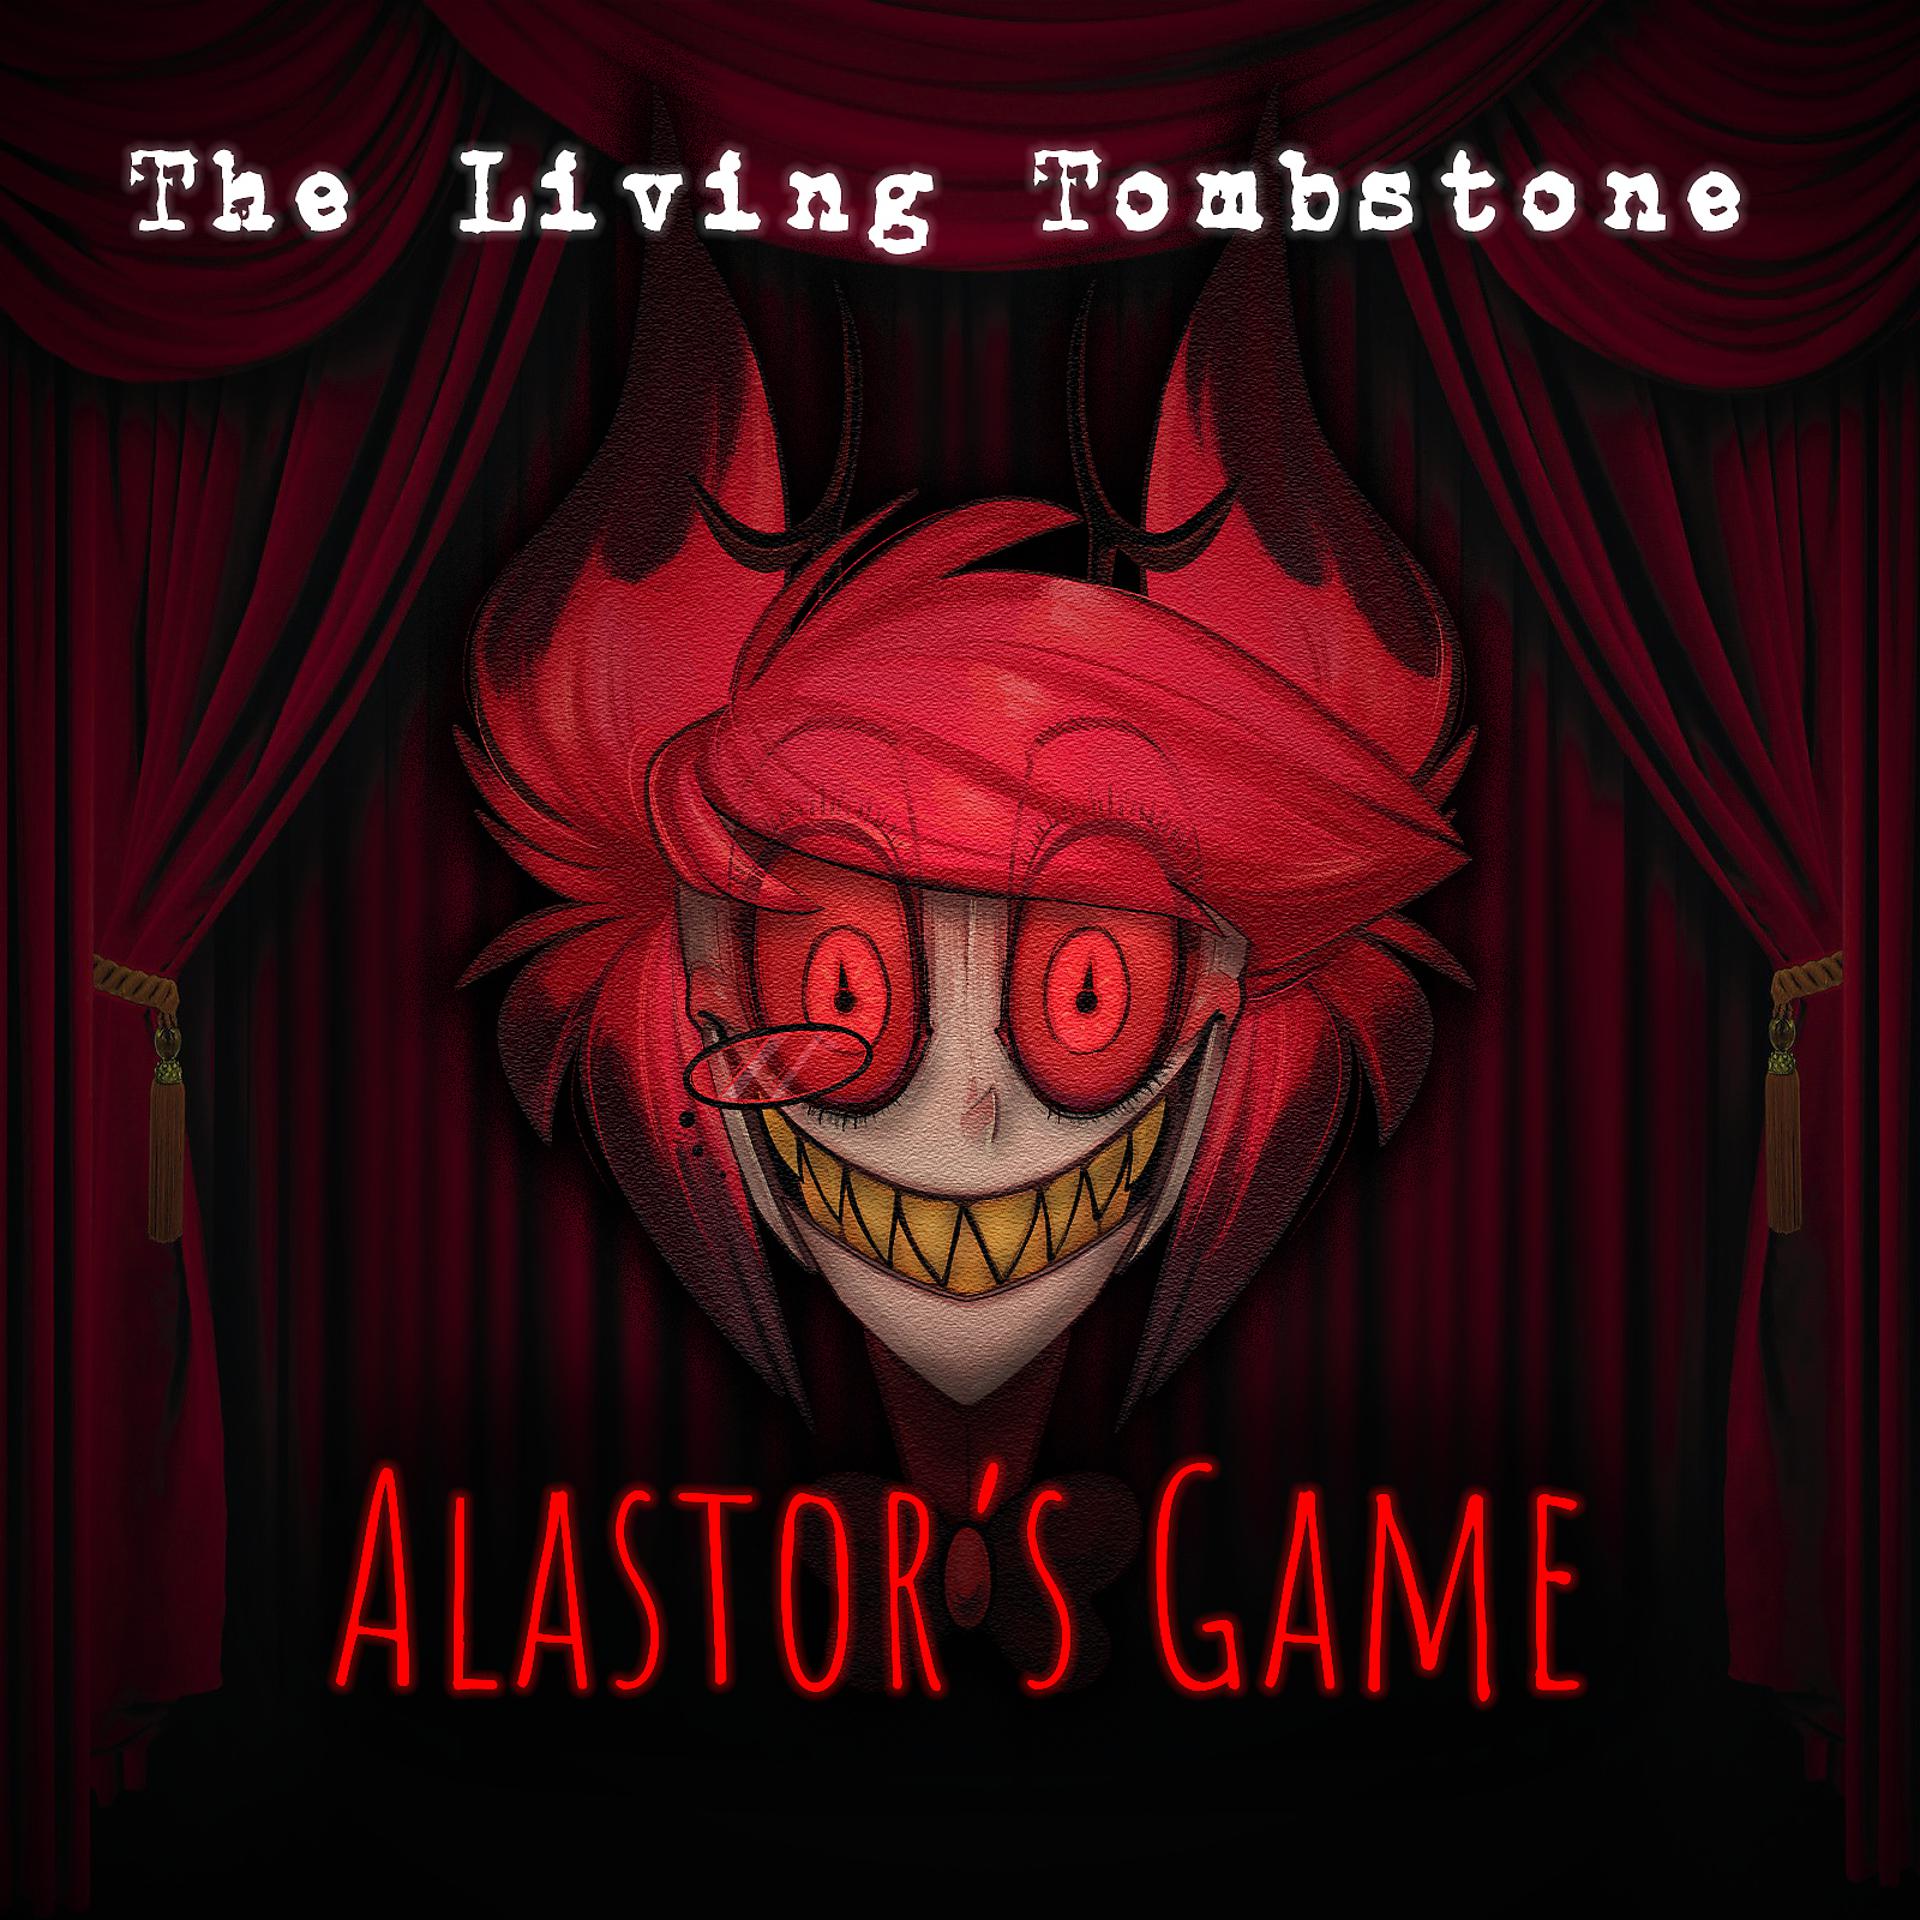 The living tombstone alastor s game. Аластор the Living Tombstone. Alastor game the Living Tombstone. Alastor s game the Living Tombstone. The Living Tombstone текст.